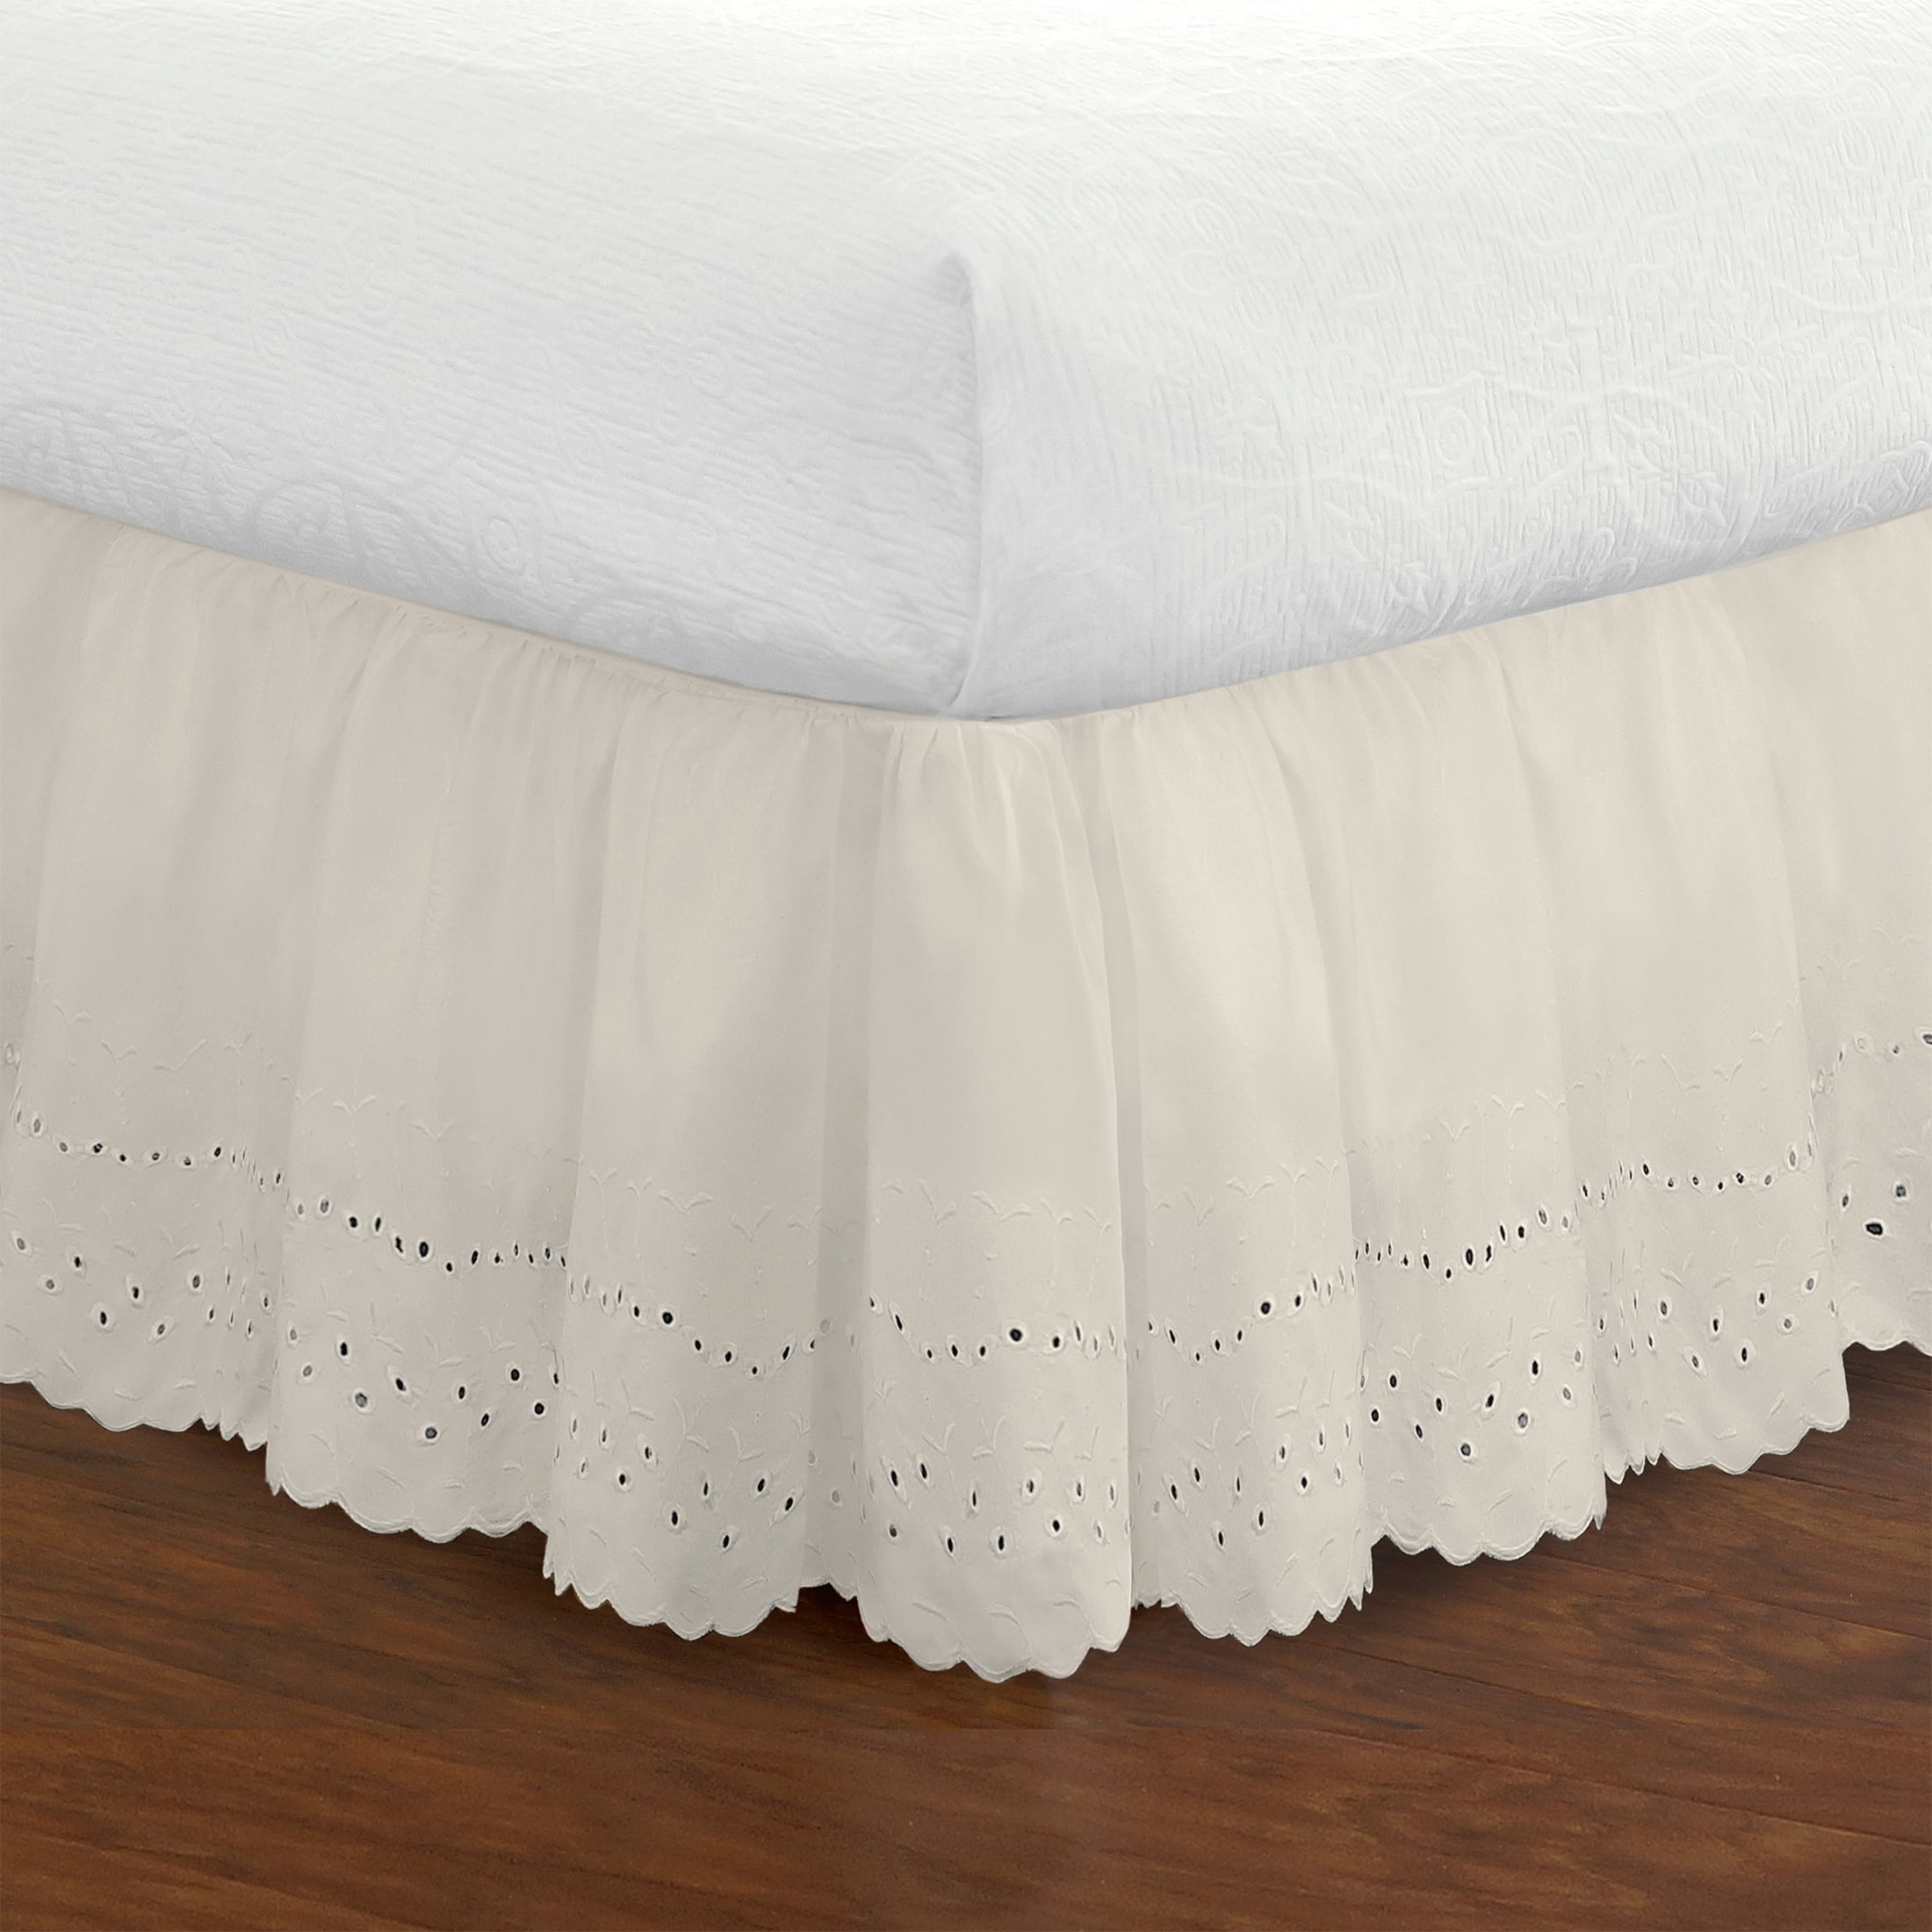 Harmony Lane Eyelet Ruffled Bed Skirt with Platform Available in all Sizes